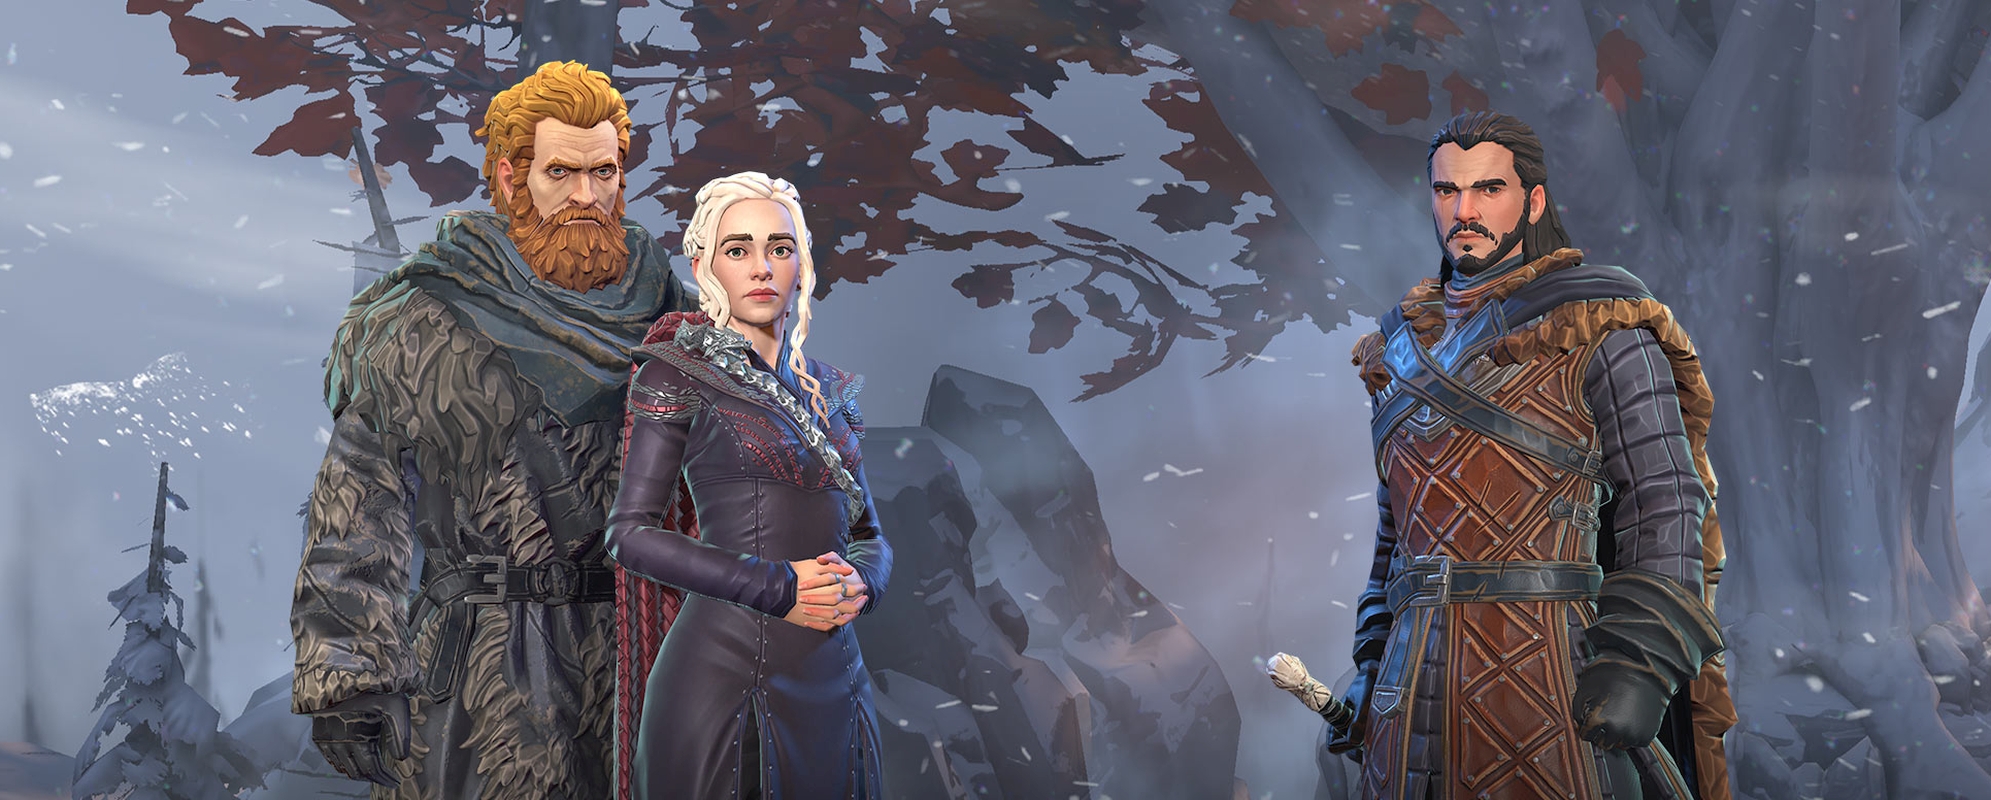 Game of Thrones: Beyond the Wall Release Date Announced With Pre-Order Bonuses Available Now